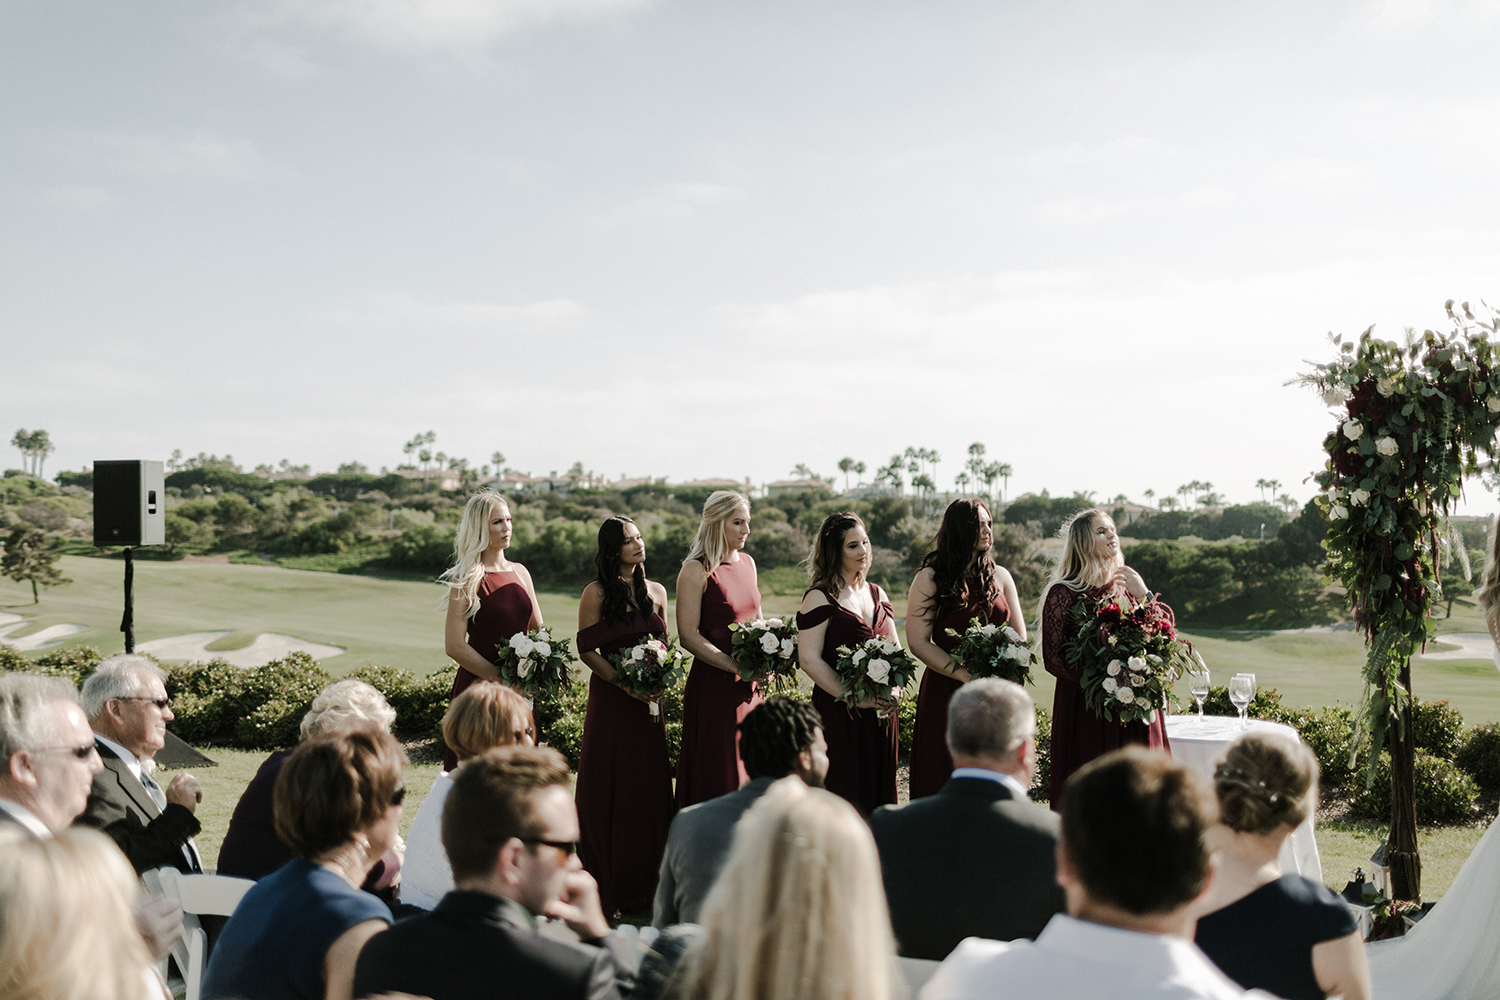 Merlot Colored Wedding / Monarch Beach Resort Wedding / Oceanfront Wedding / Greenery / Lucky Day Events Co. / Morgan Hydinger Photography and Videography